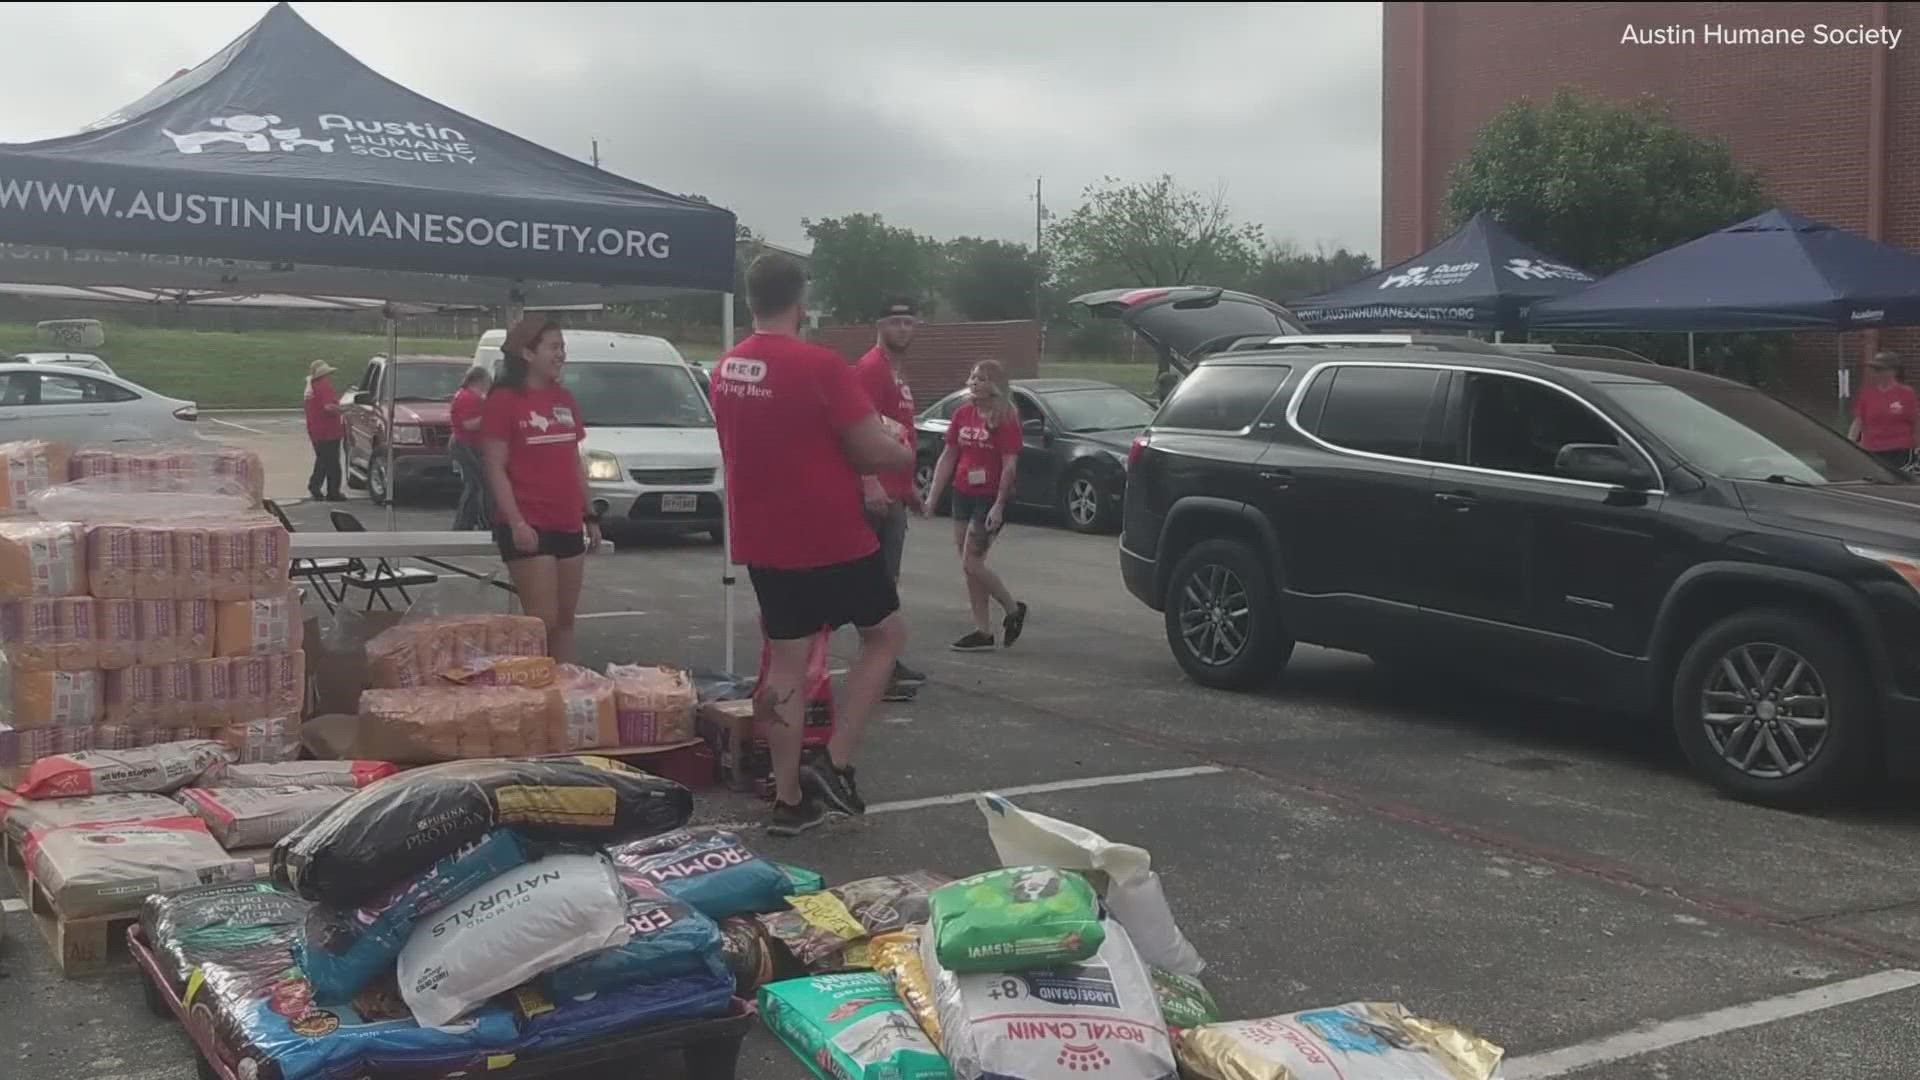 Canidae Pet Food teamed up with Austin Humane Society for a drive-thru pet pantry event.